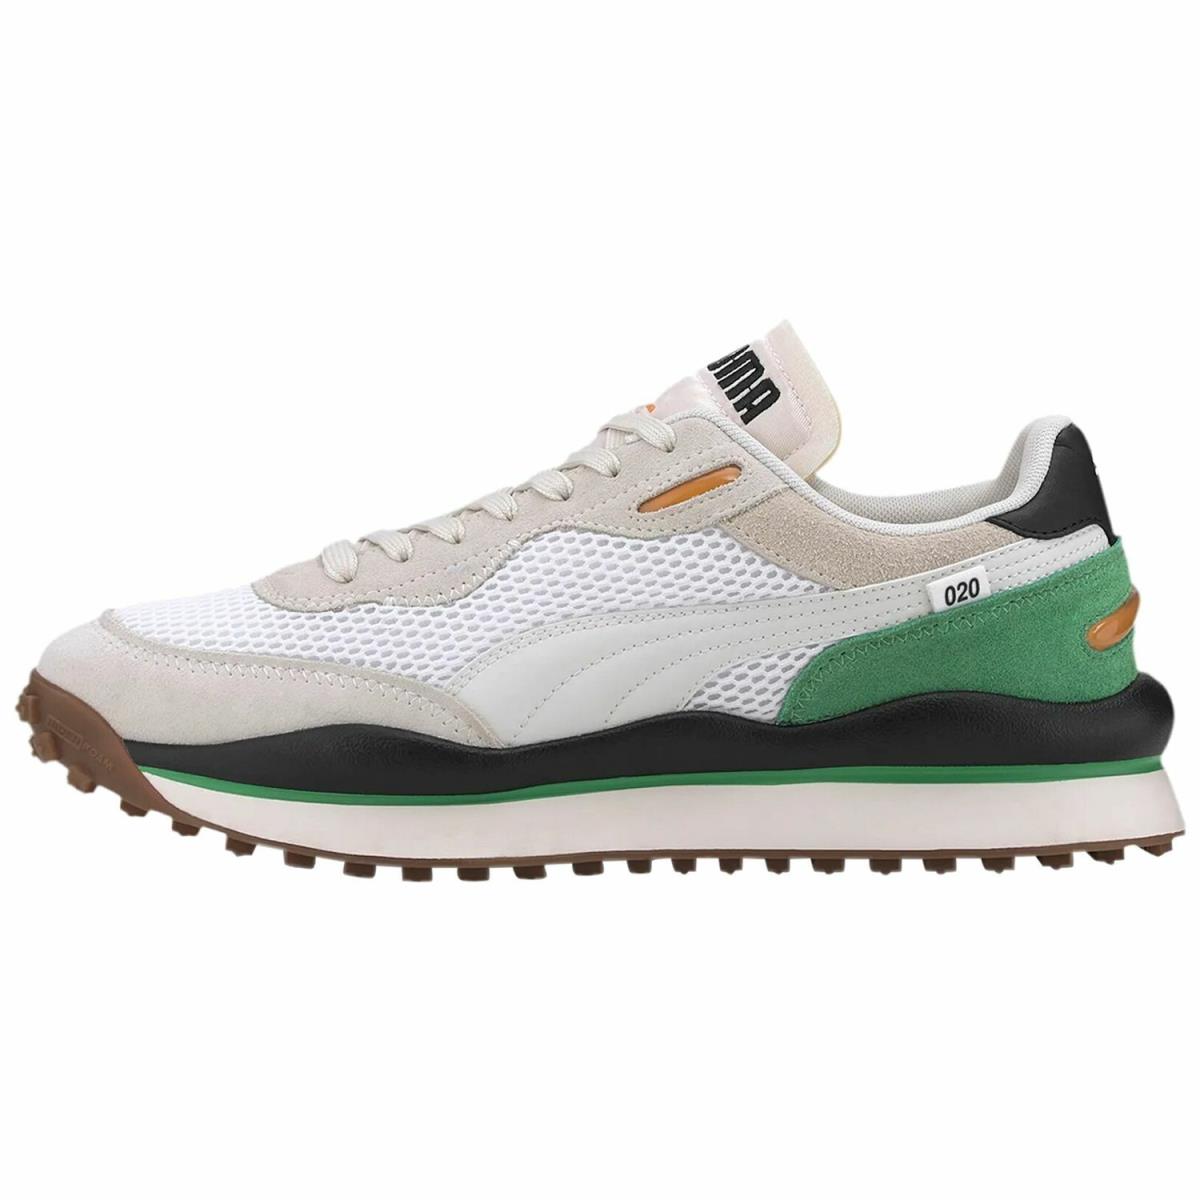 Puma Style Rider Stream On Mens 371527-02 White Grey Green Shoes Size 8.5